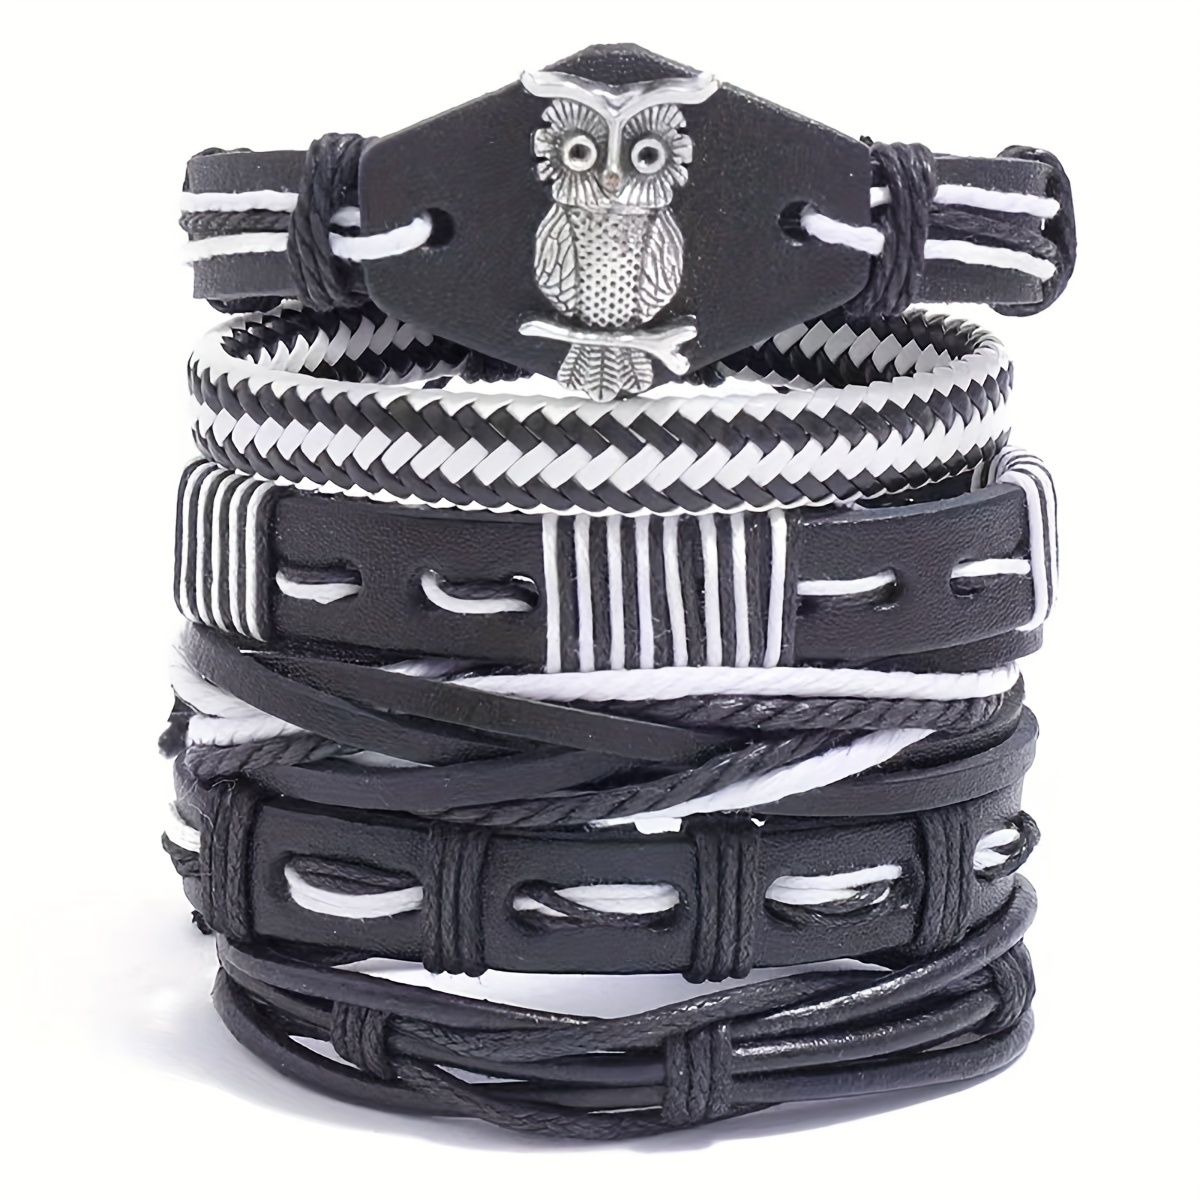 

6 Pcs Leather Braided Bracelet, Medieval Leather Cuff Wristband With Owl